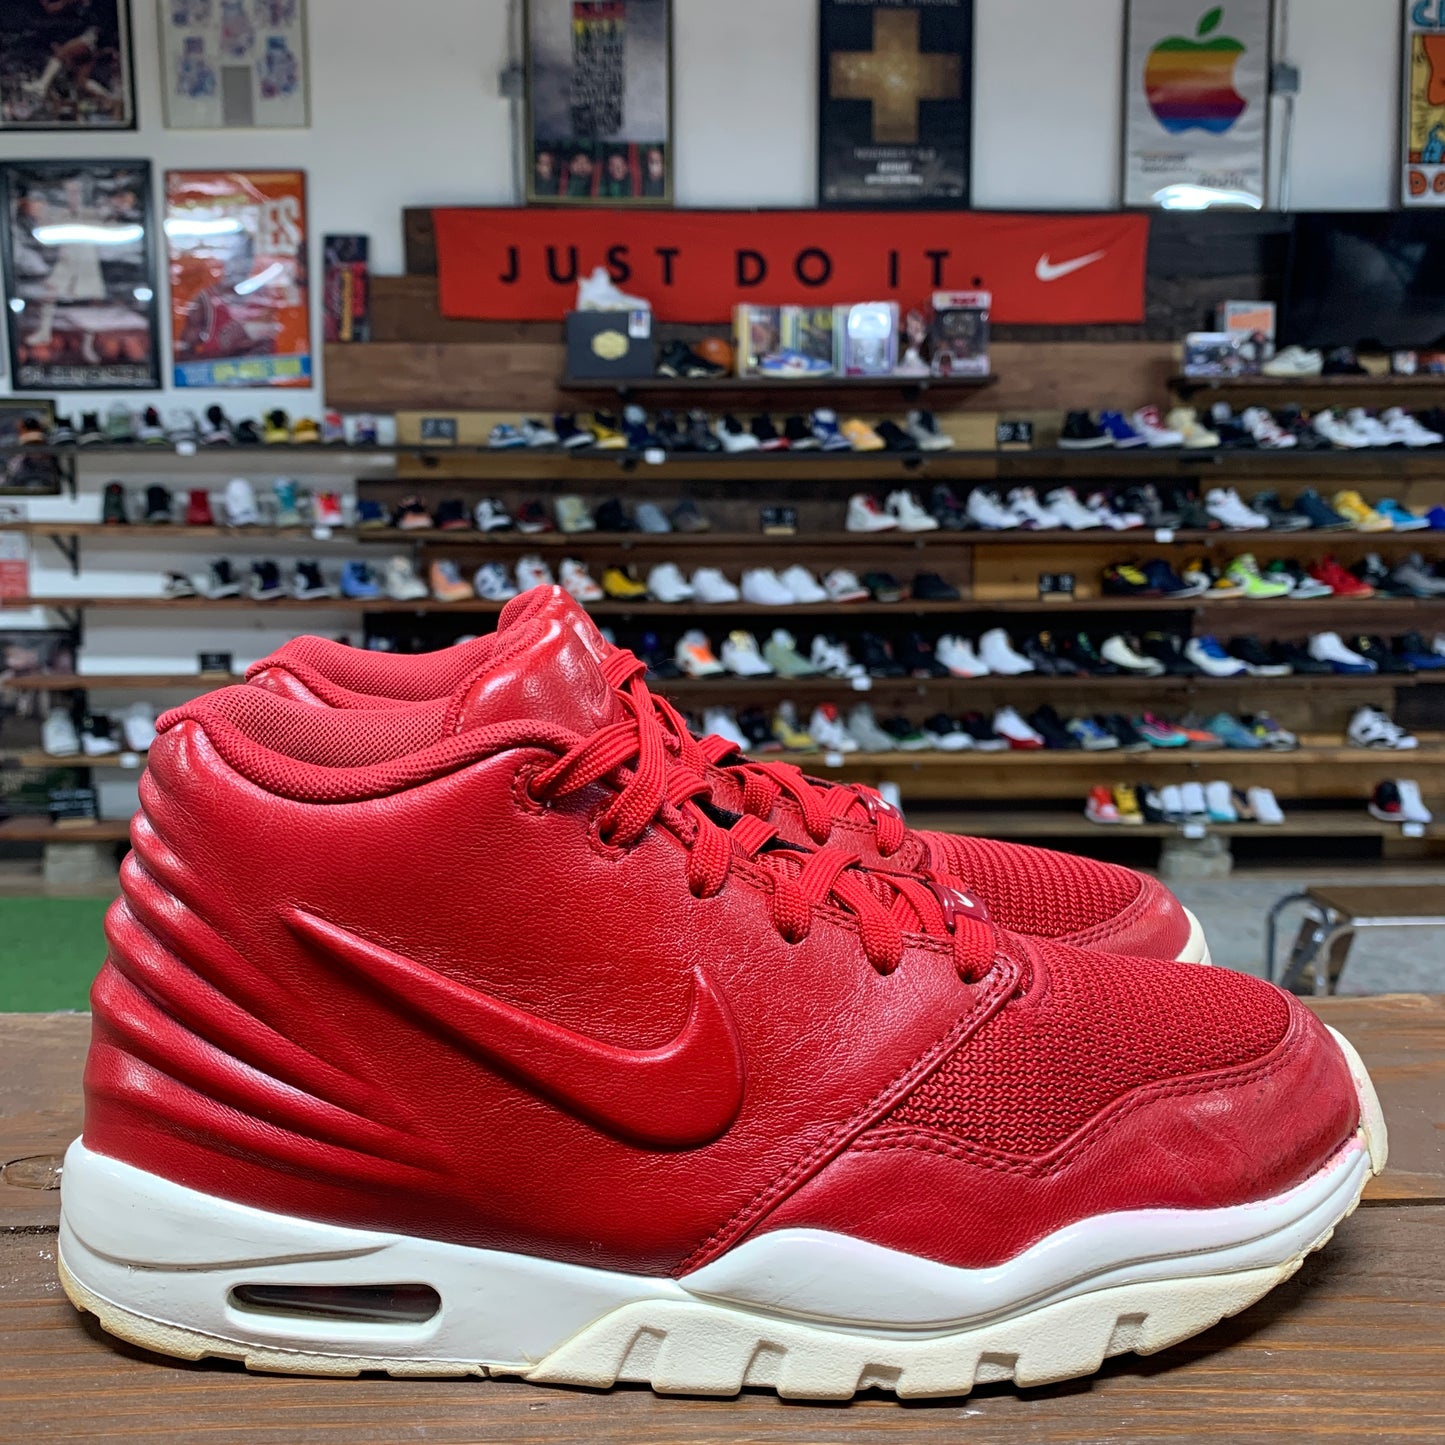 Nike Air Entertainer 'Gym Red' Size 8.5